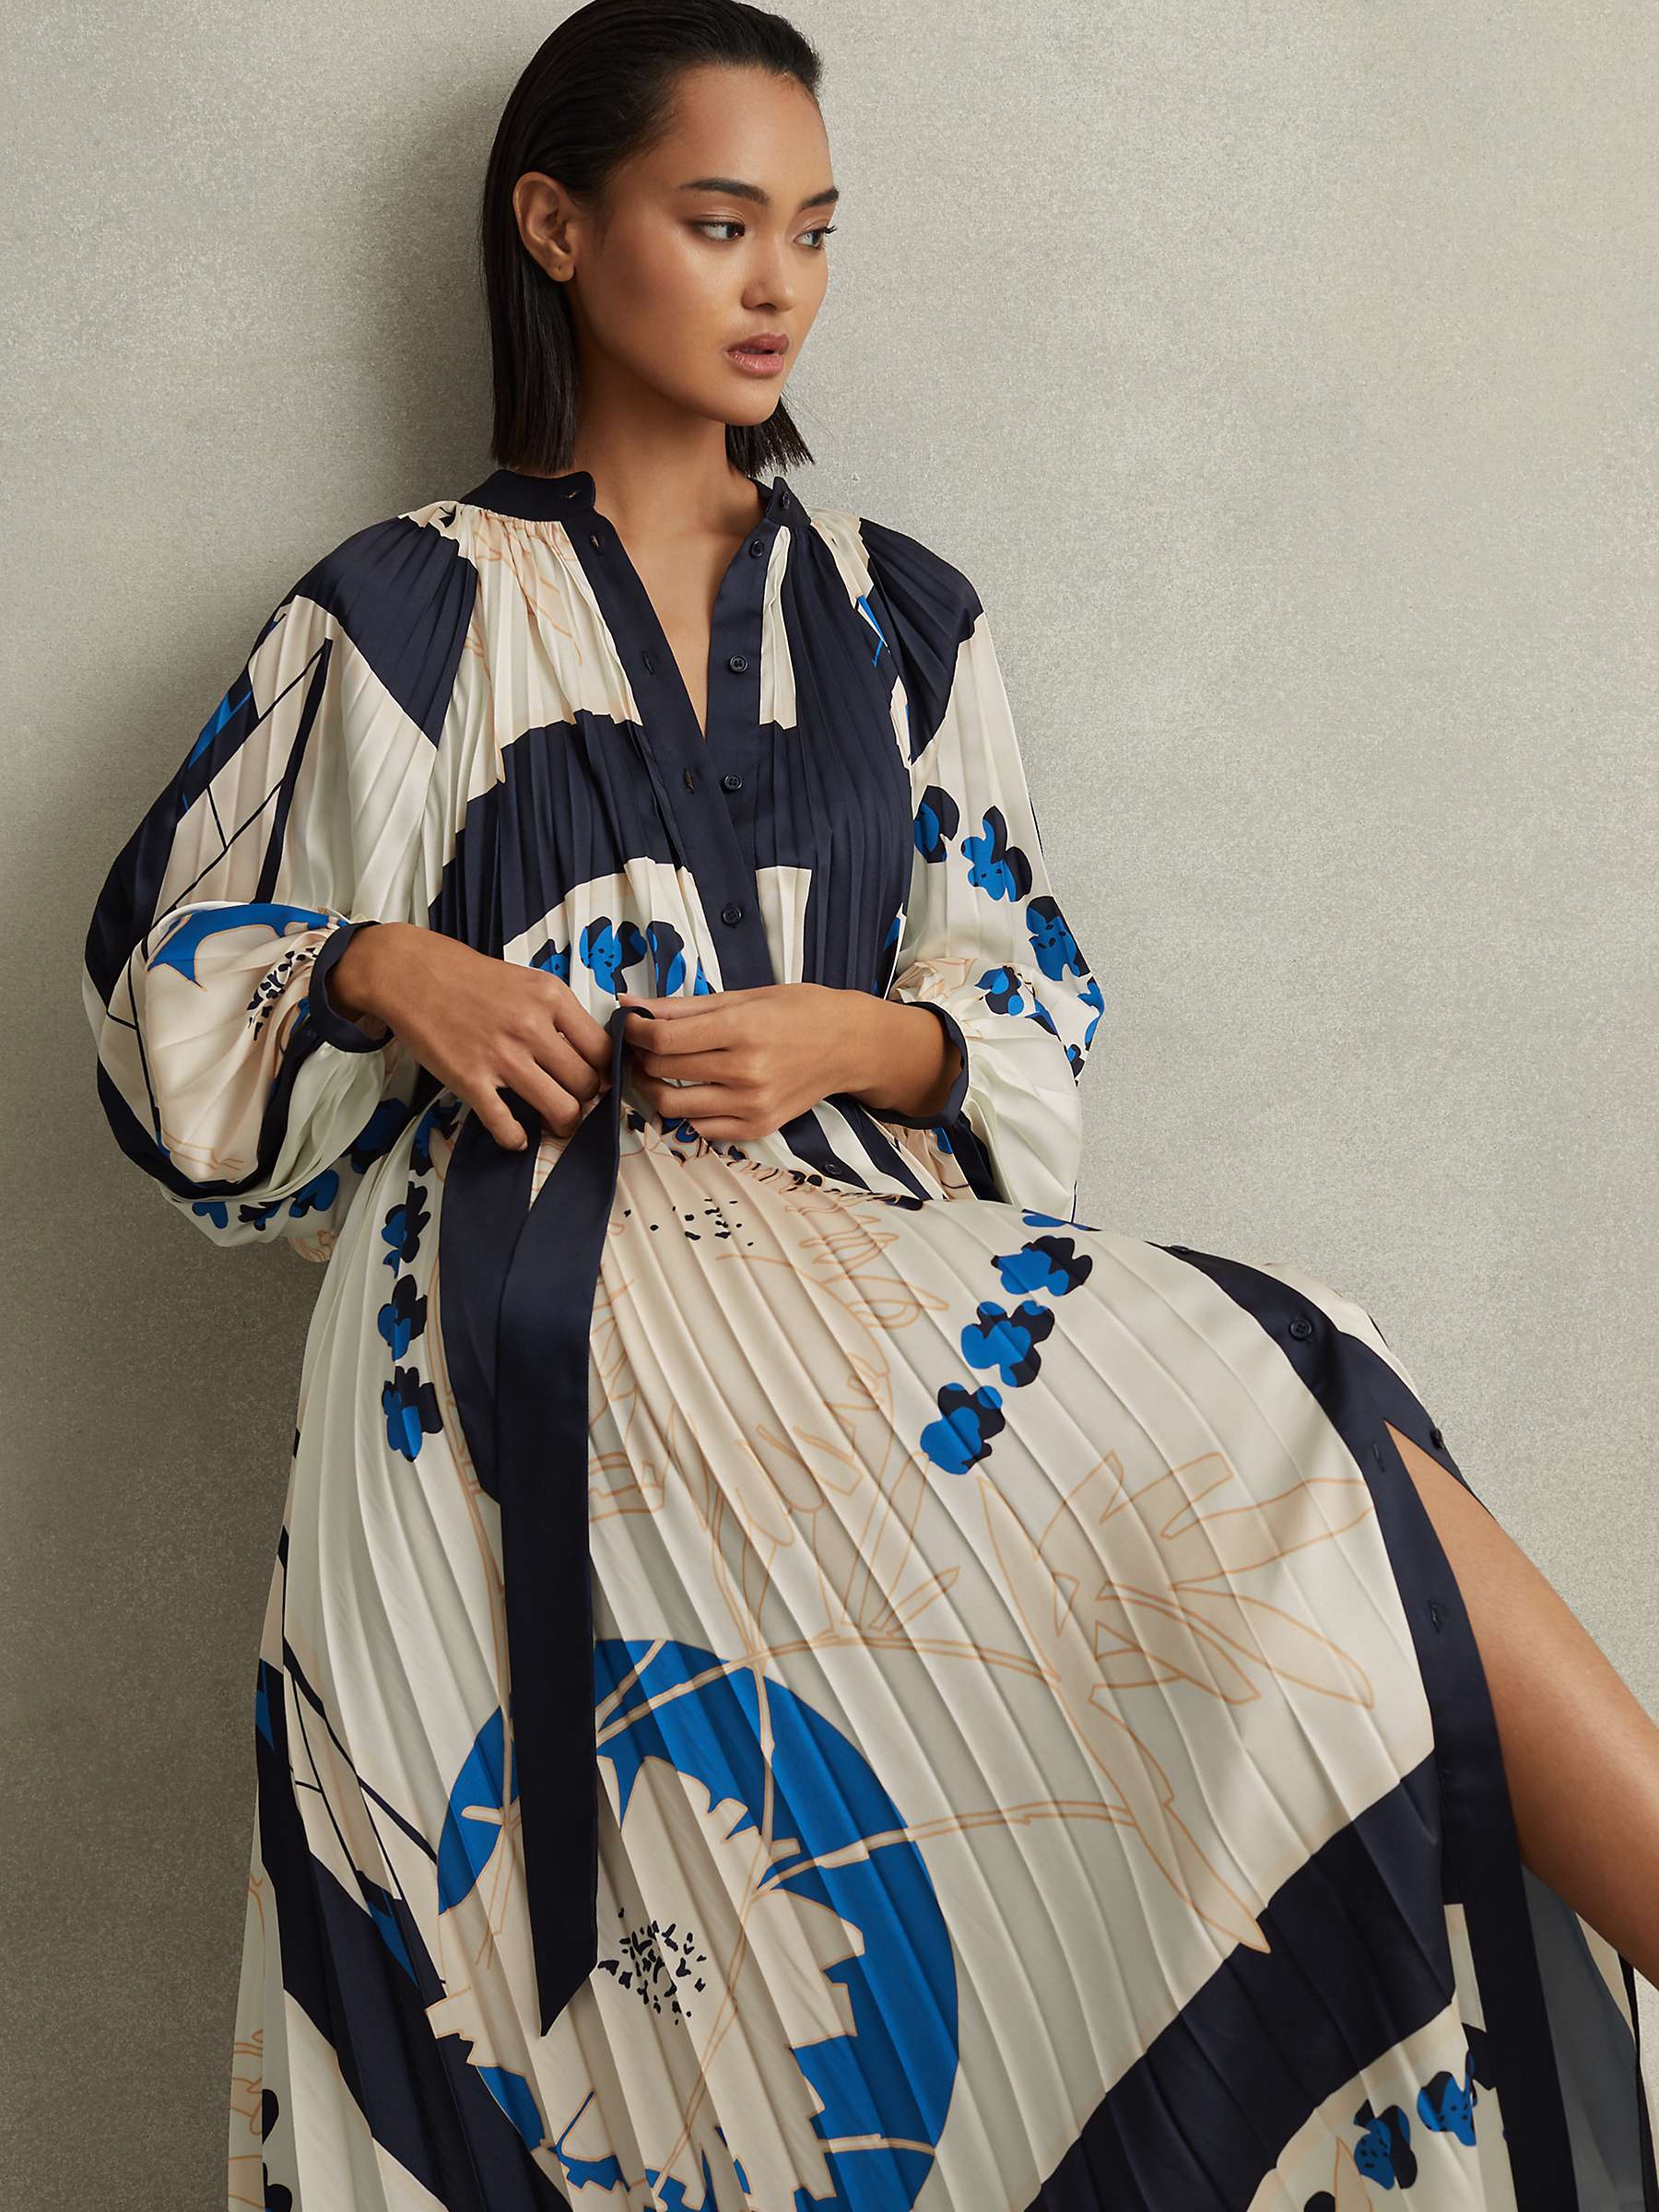 Buy Reiss Daiya Placement Print Pleated Maxi Dress, Blue/Multi Online at johnlewis.com